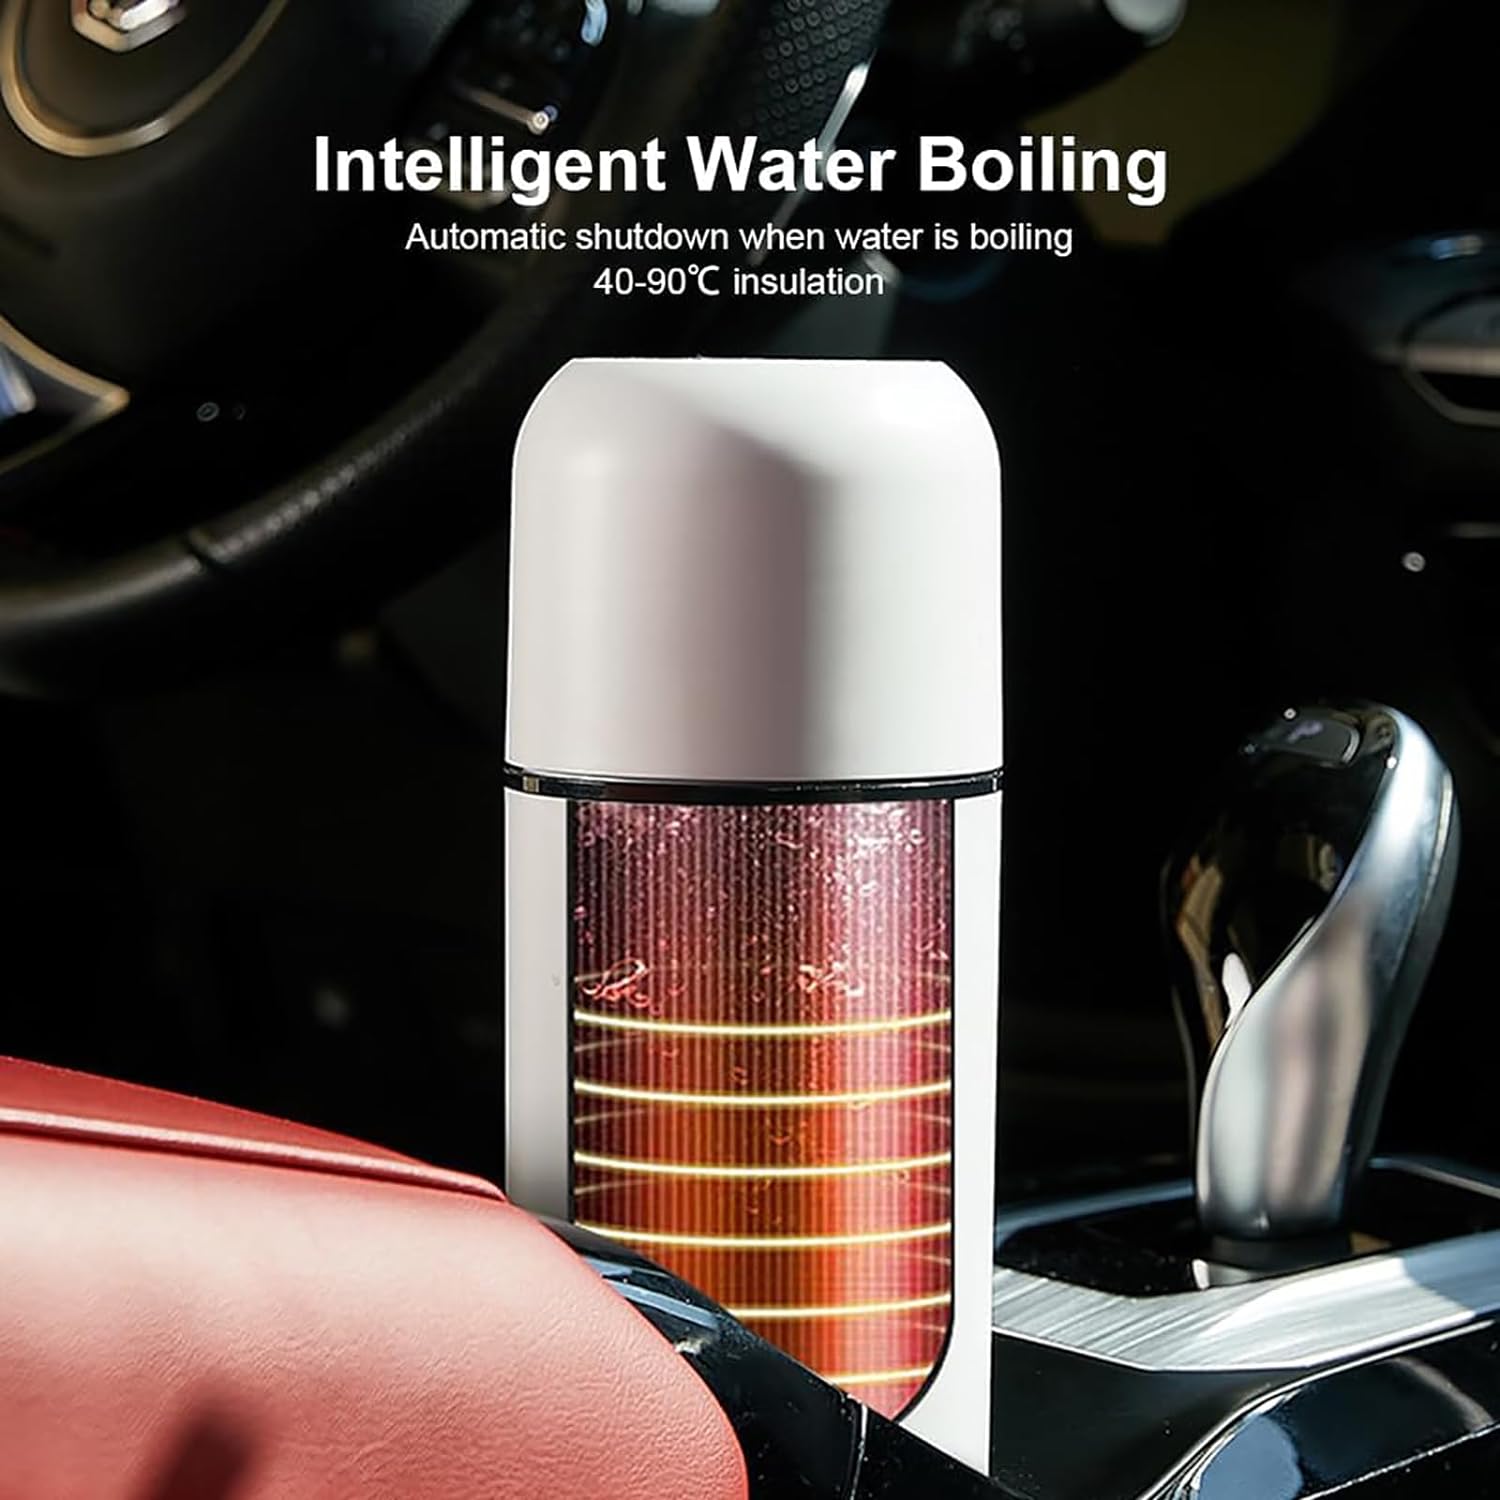 Portable Coffee and Tea Car Heating Bottle Cup with automatic shutdown feature when water is boiling